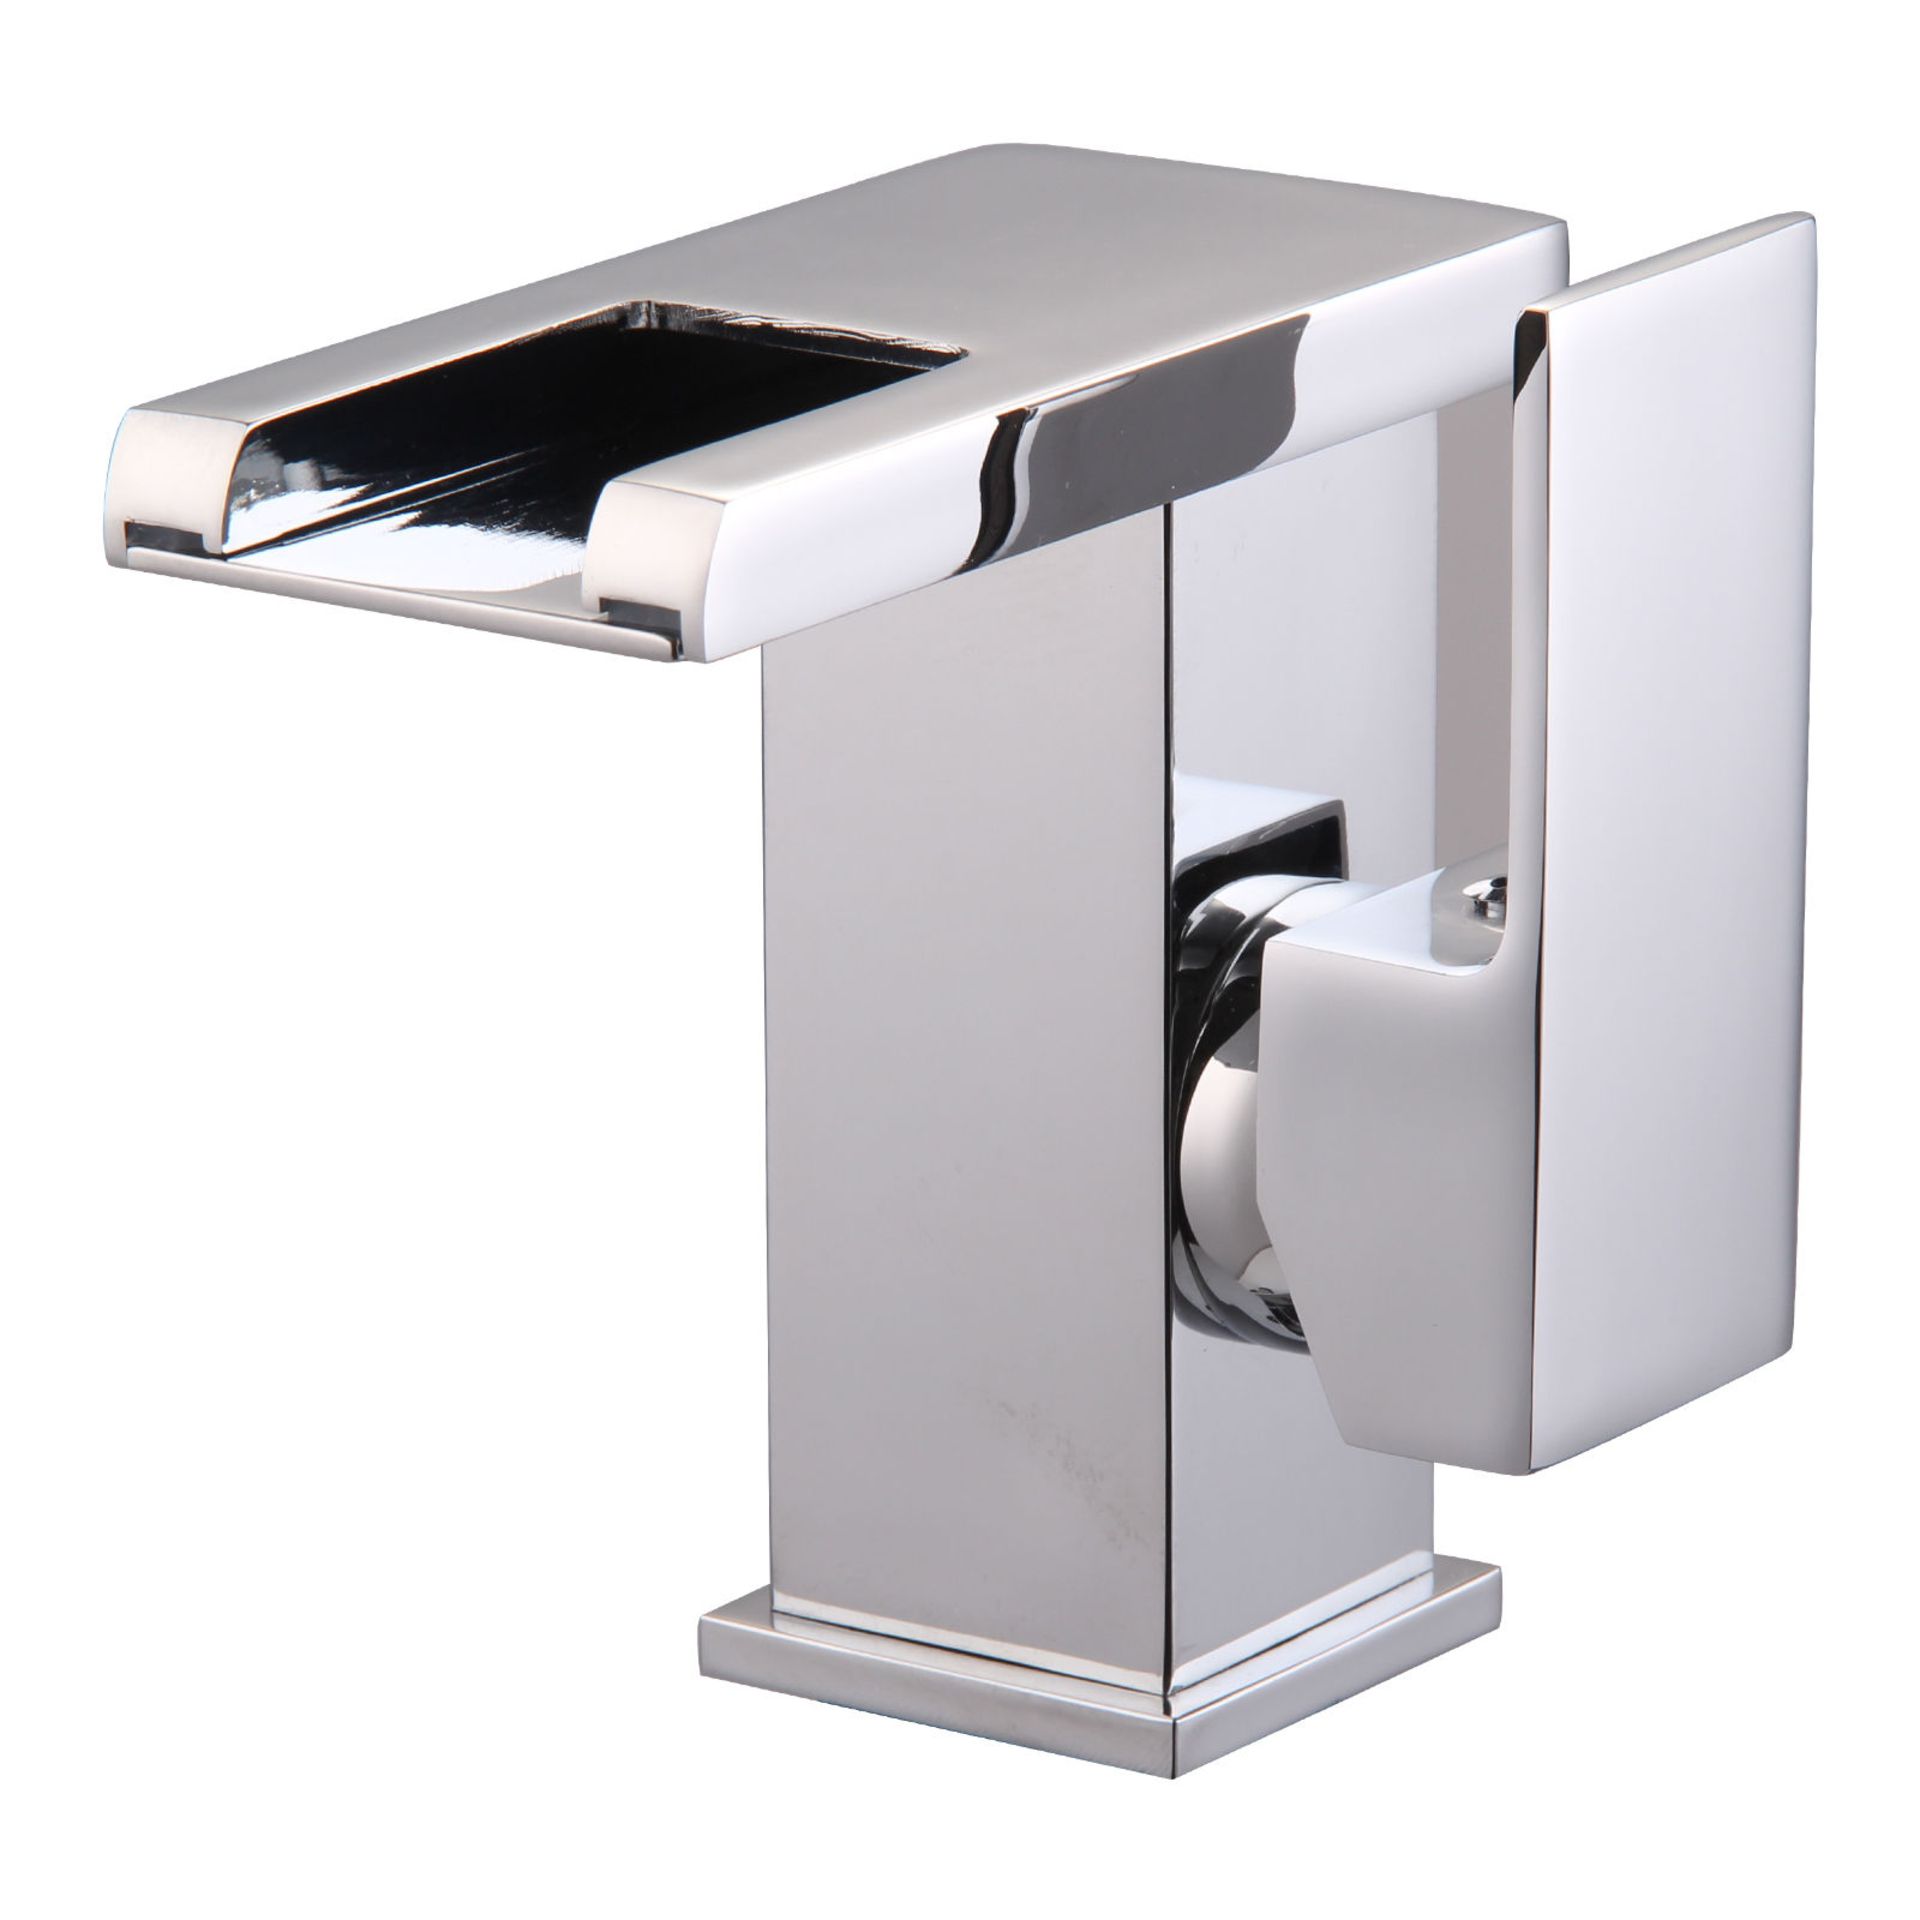 (J198) LED Waterfall Bathroom Basin Mixer Tap. RRP £229.99. Easy to install and clean. All copper - Image 2 of 3